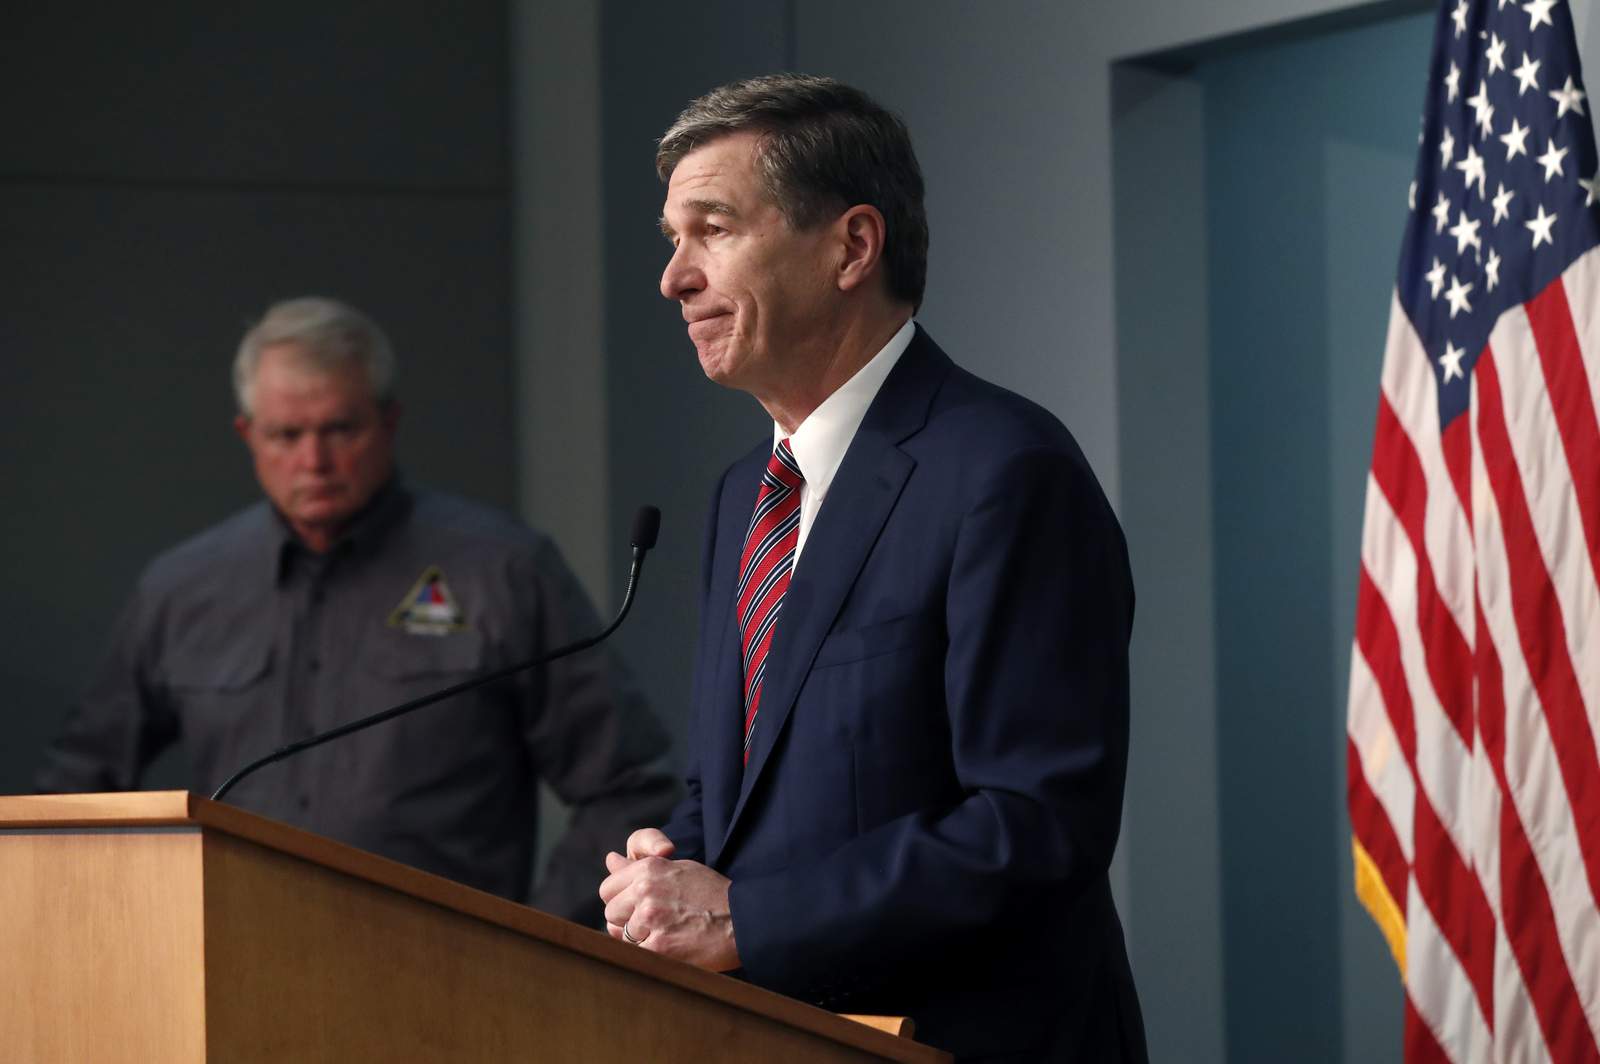 North Carolina governor: RNC hasn't submitted safety plan